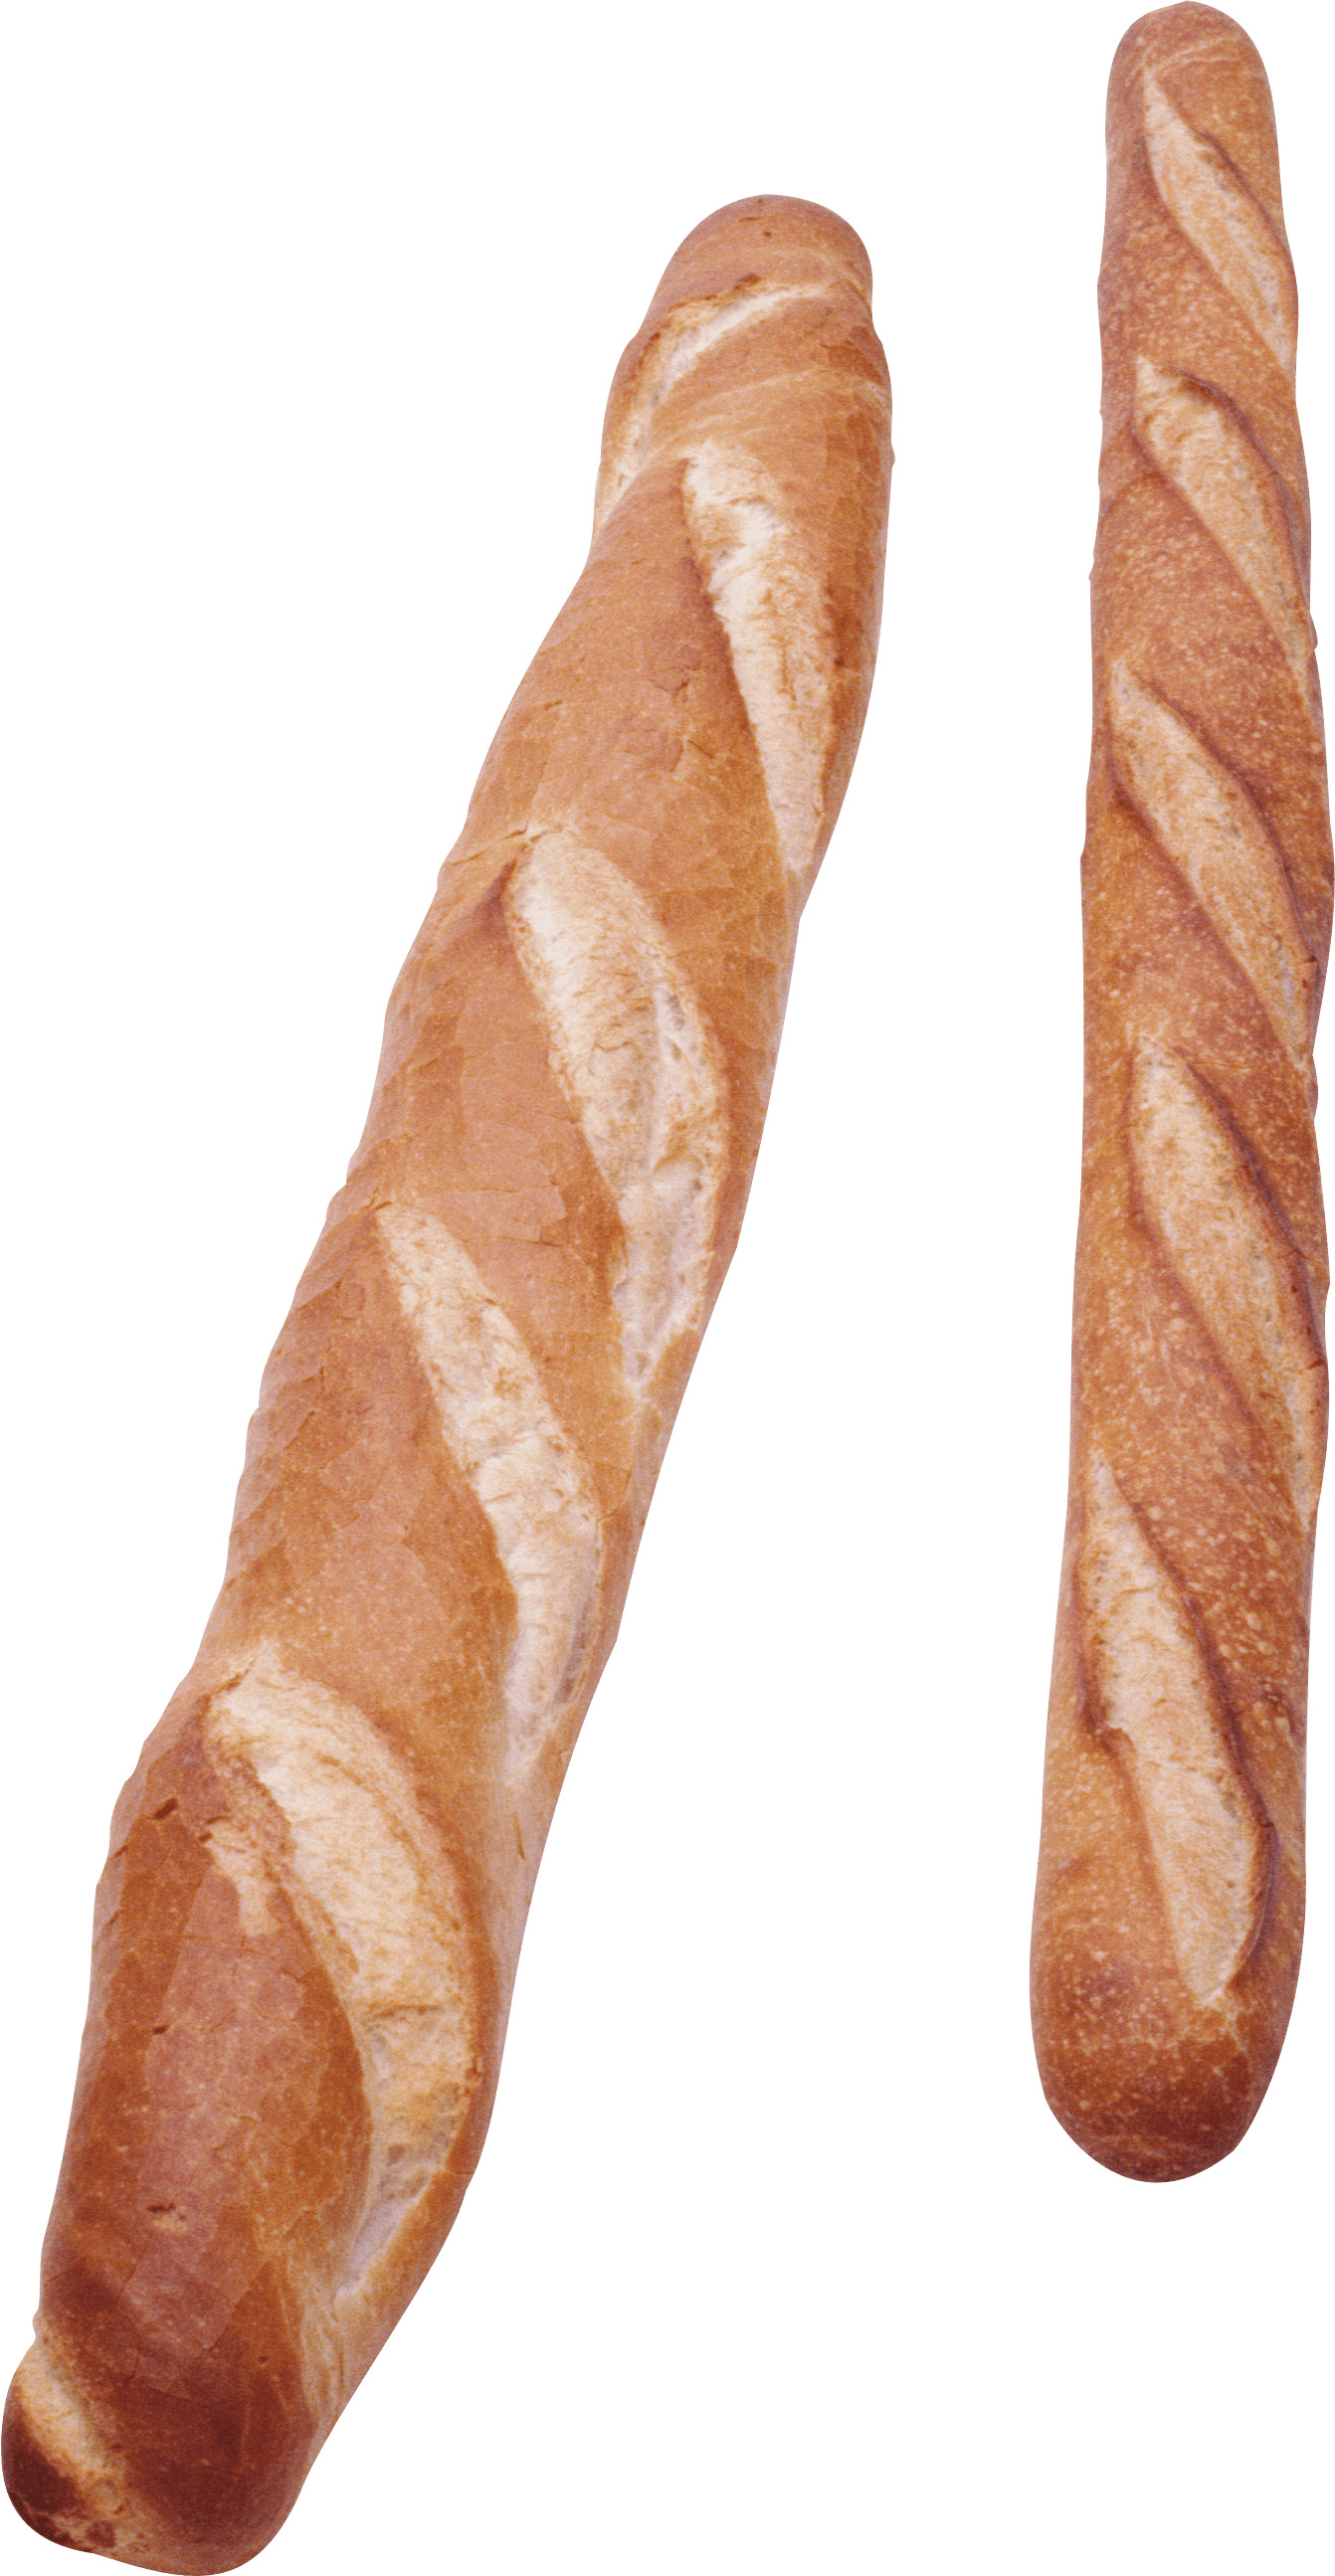 Baguettes Bread icons